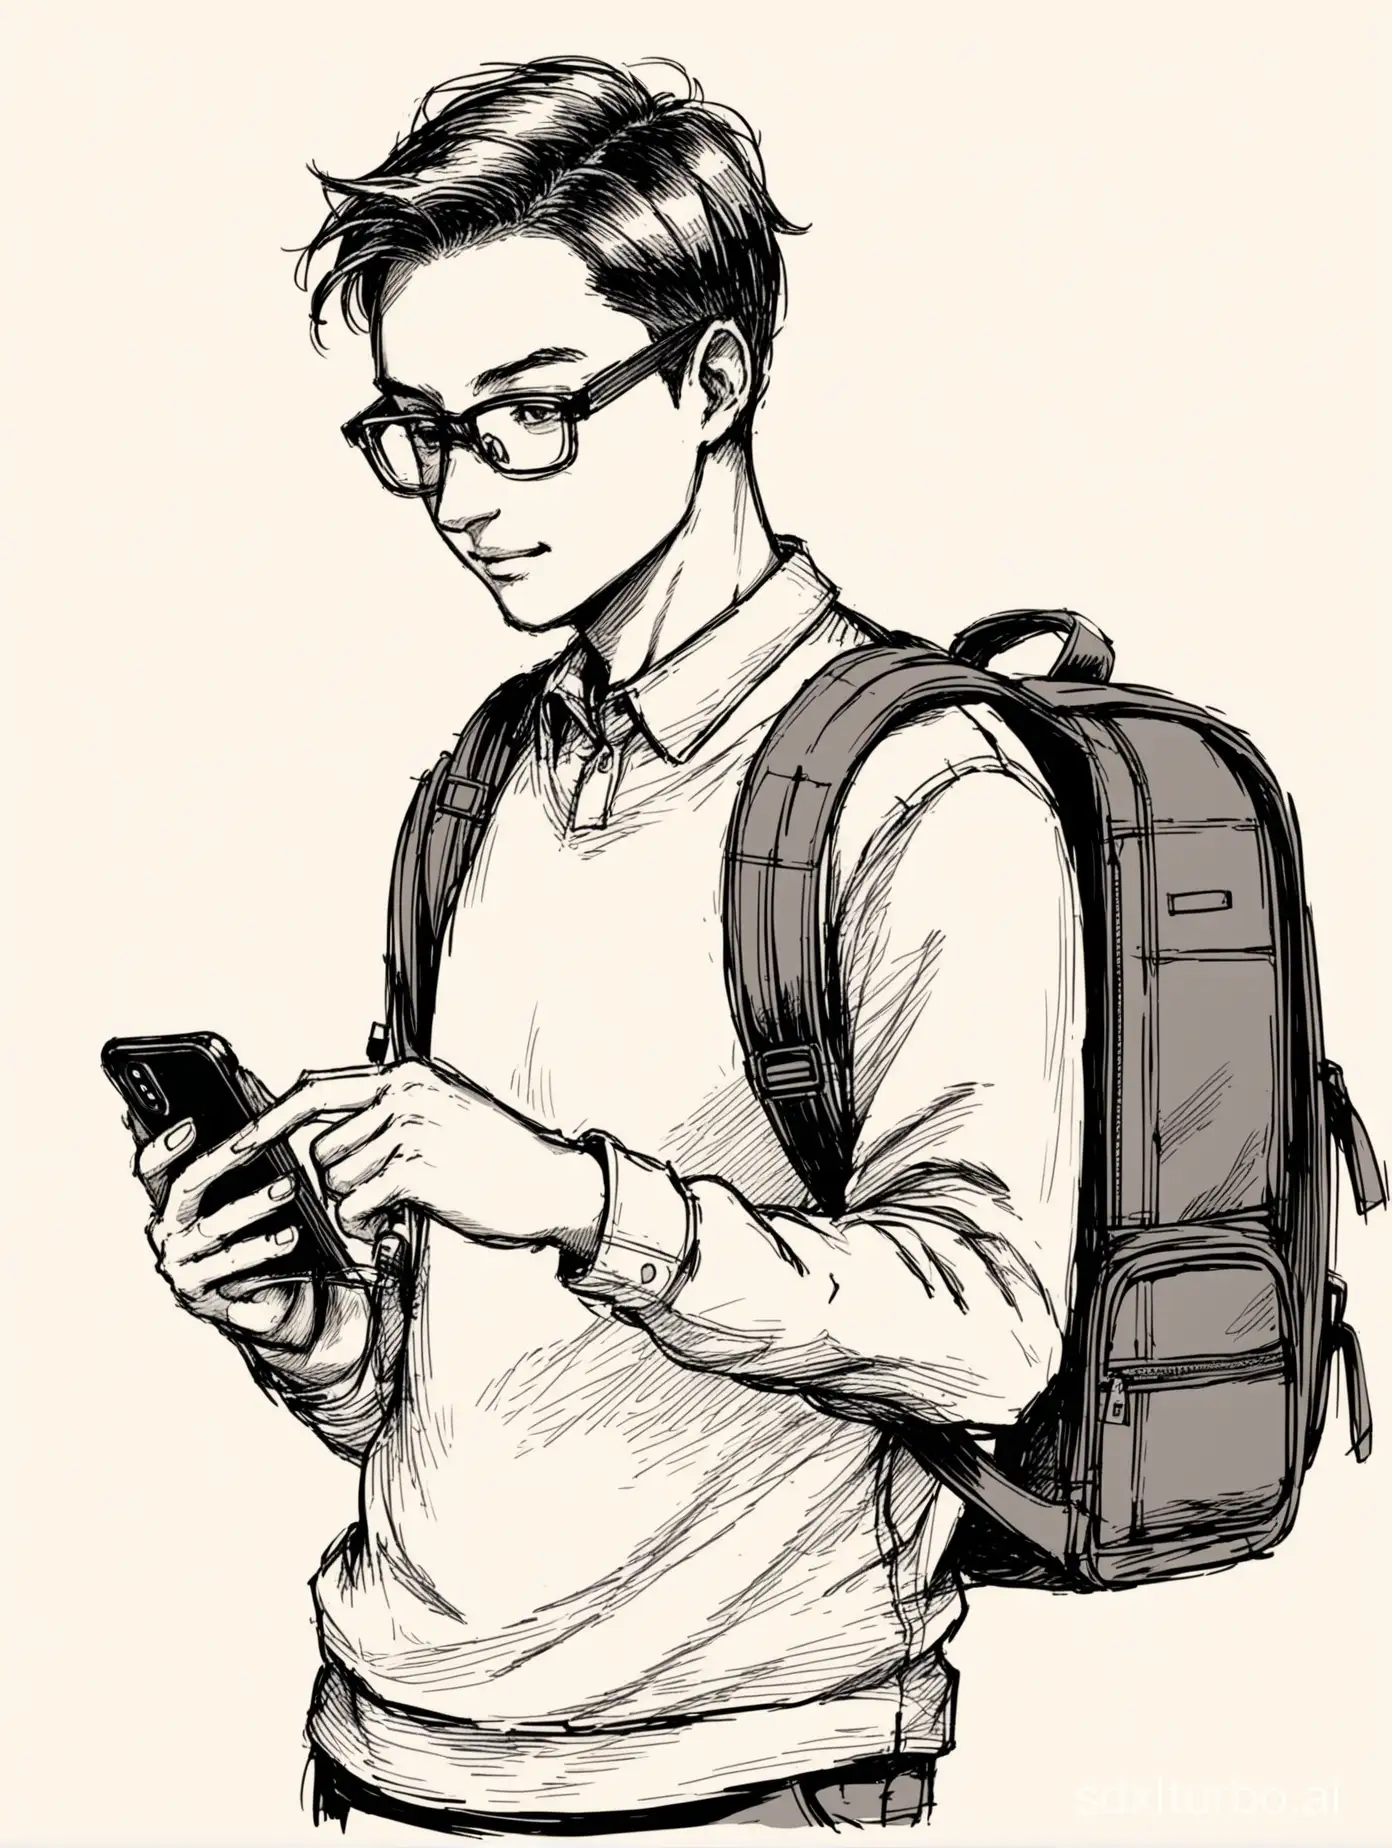 Modern-Urban-Sketch-Person-with-Backpack-and-Glasses-Engaged-with-Smartphone